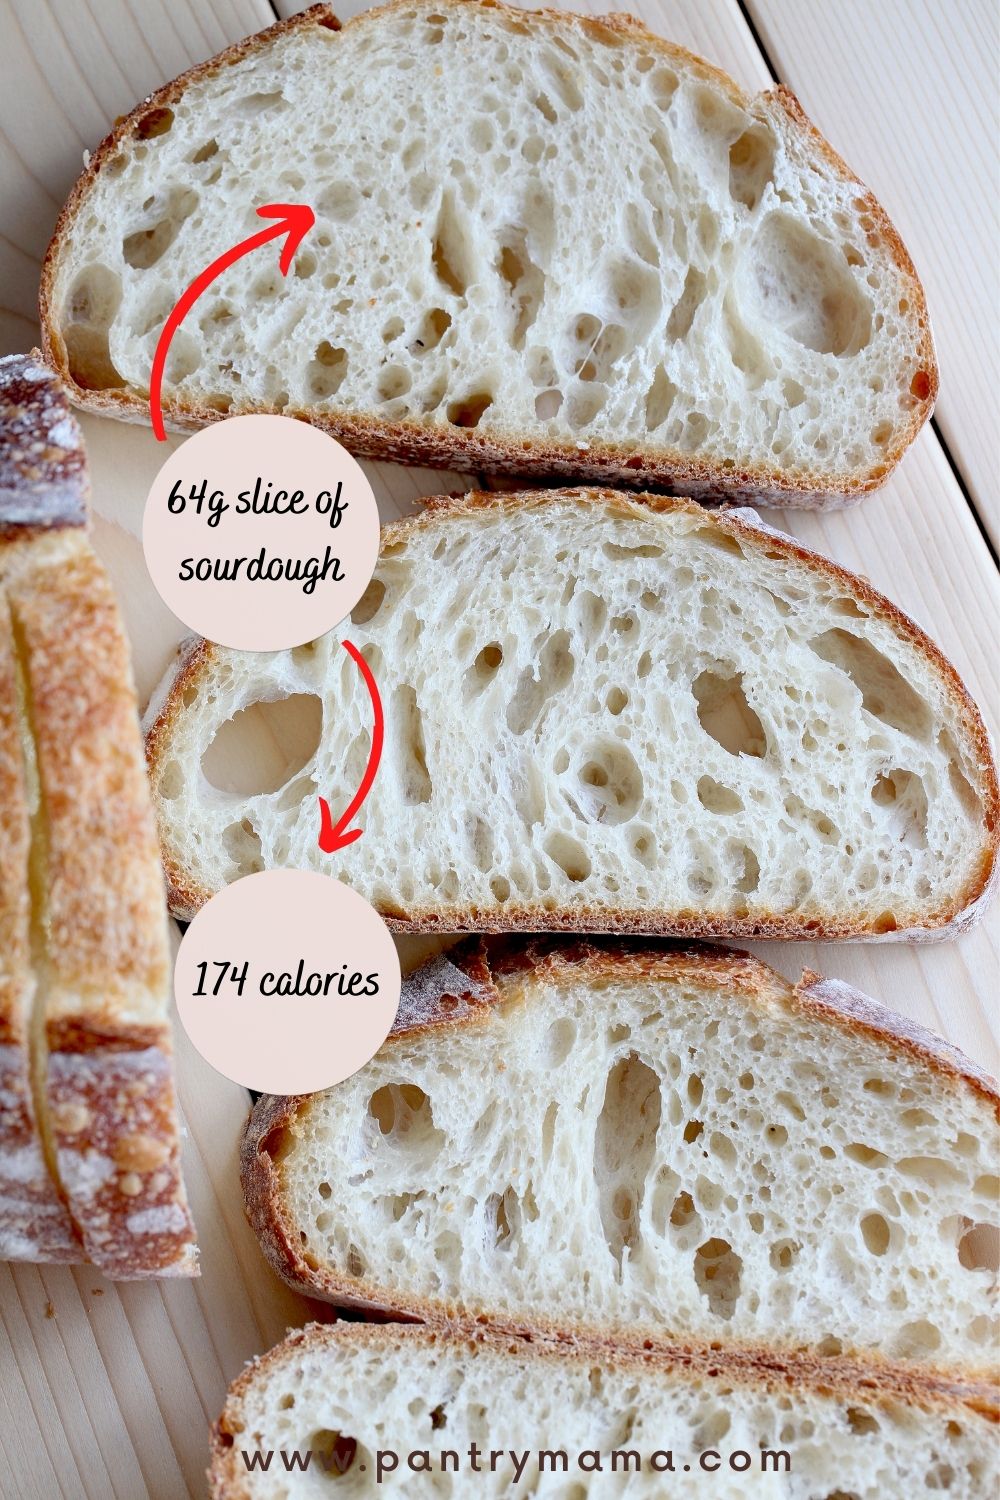 How to Calculate the Calories in Sourdough Bread - Whatever Pieces